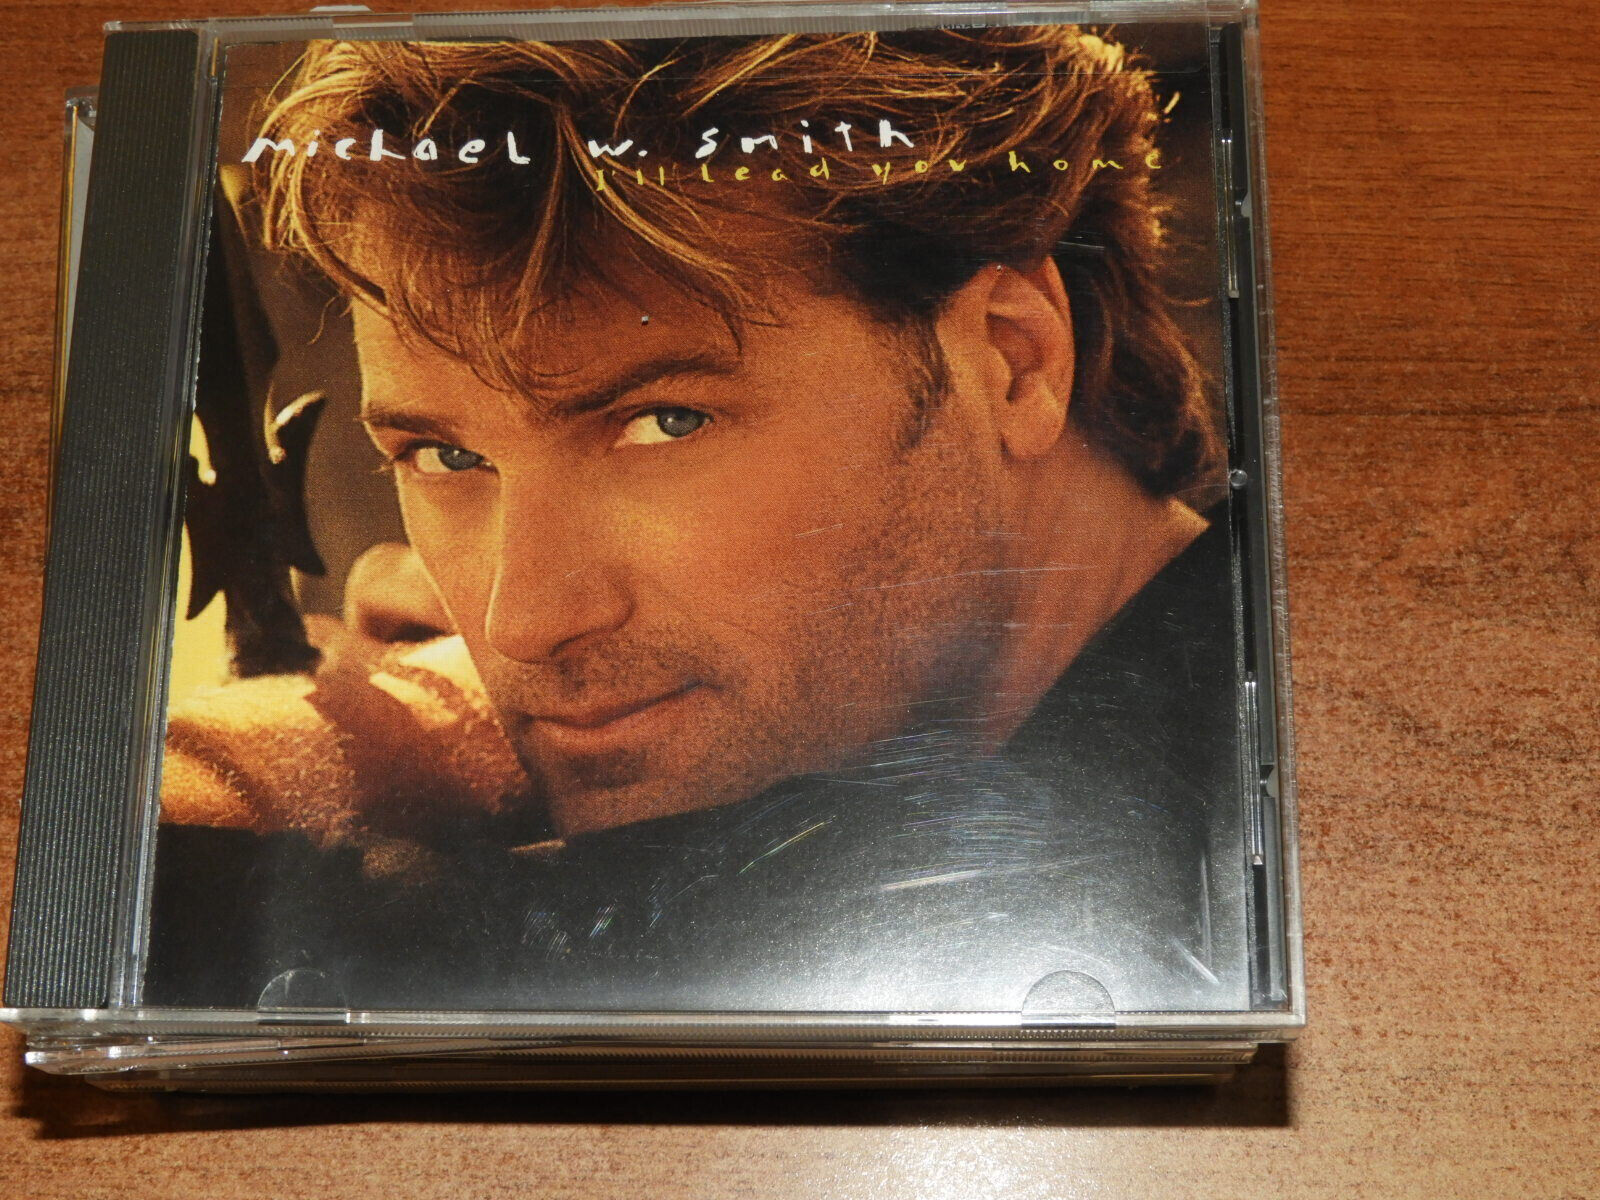 Michael W. Smith - I'll Lead You Home (CD)